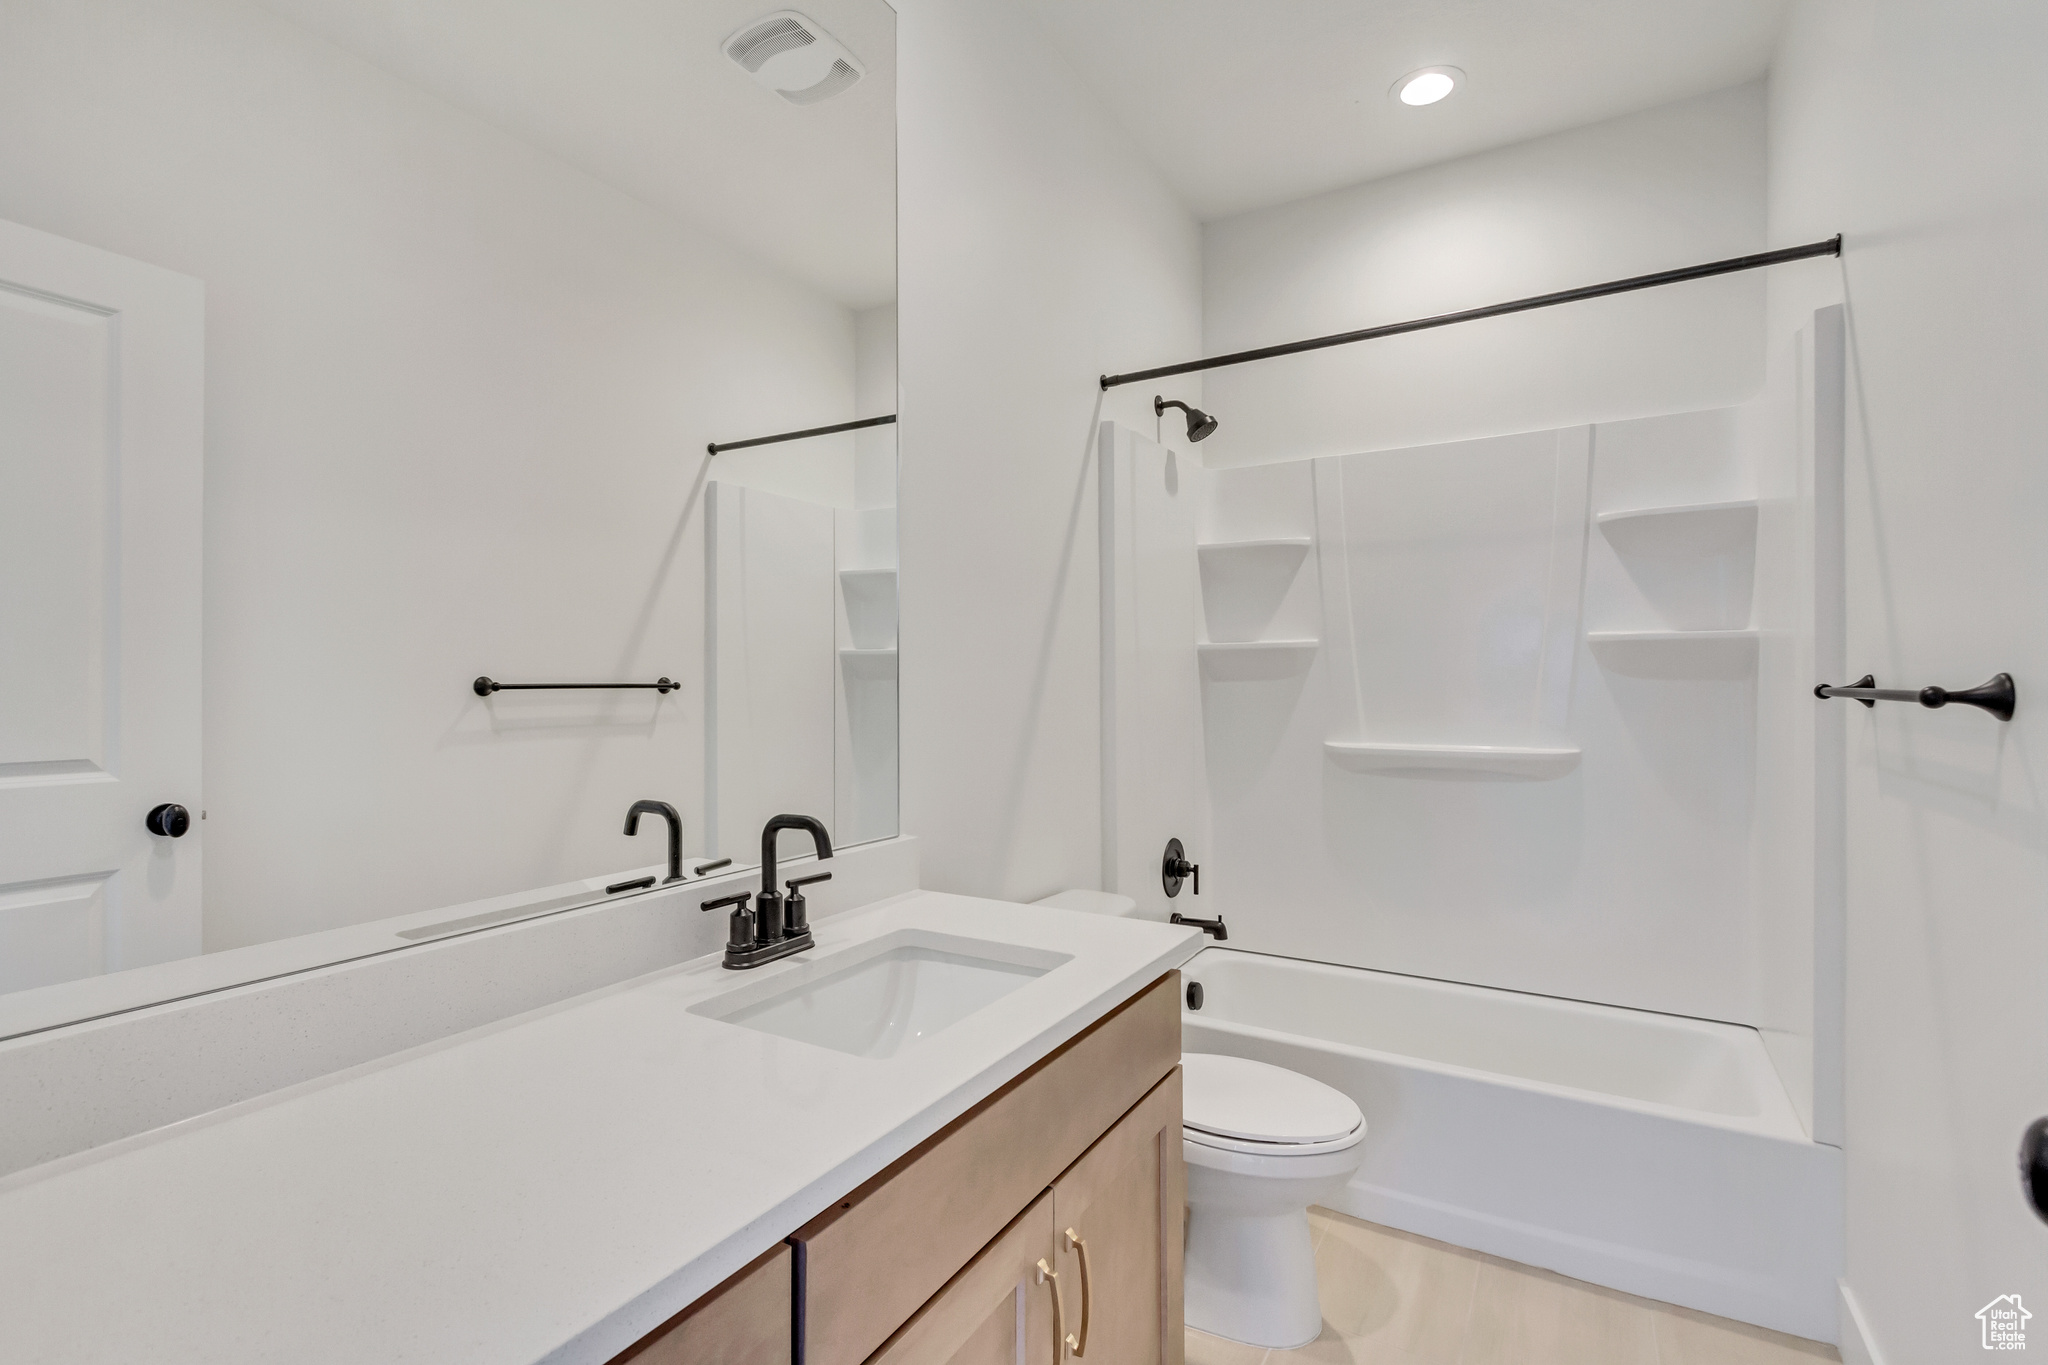 Full bathroom with vanity, toilet, and shower / washtub combination